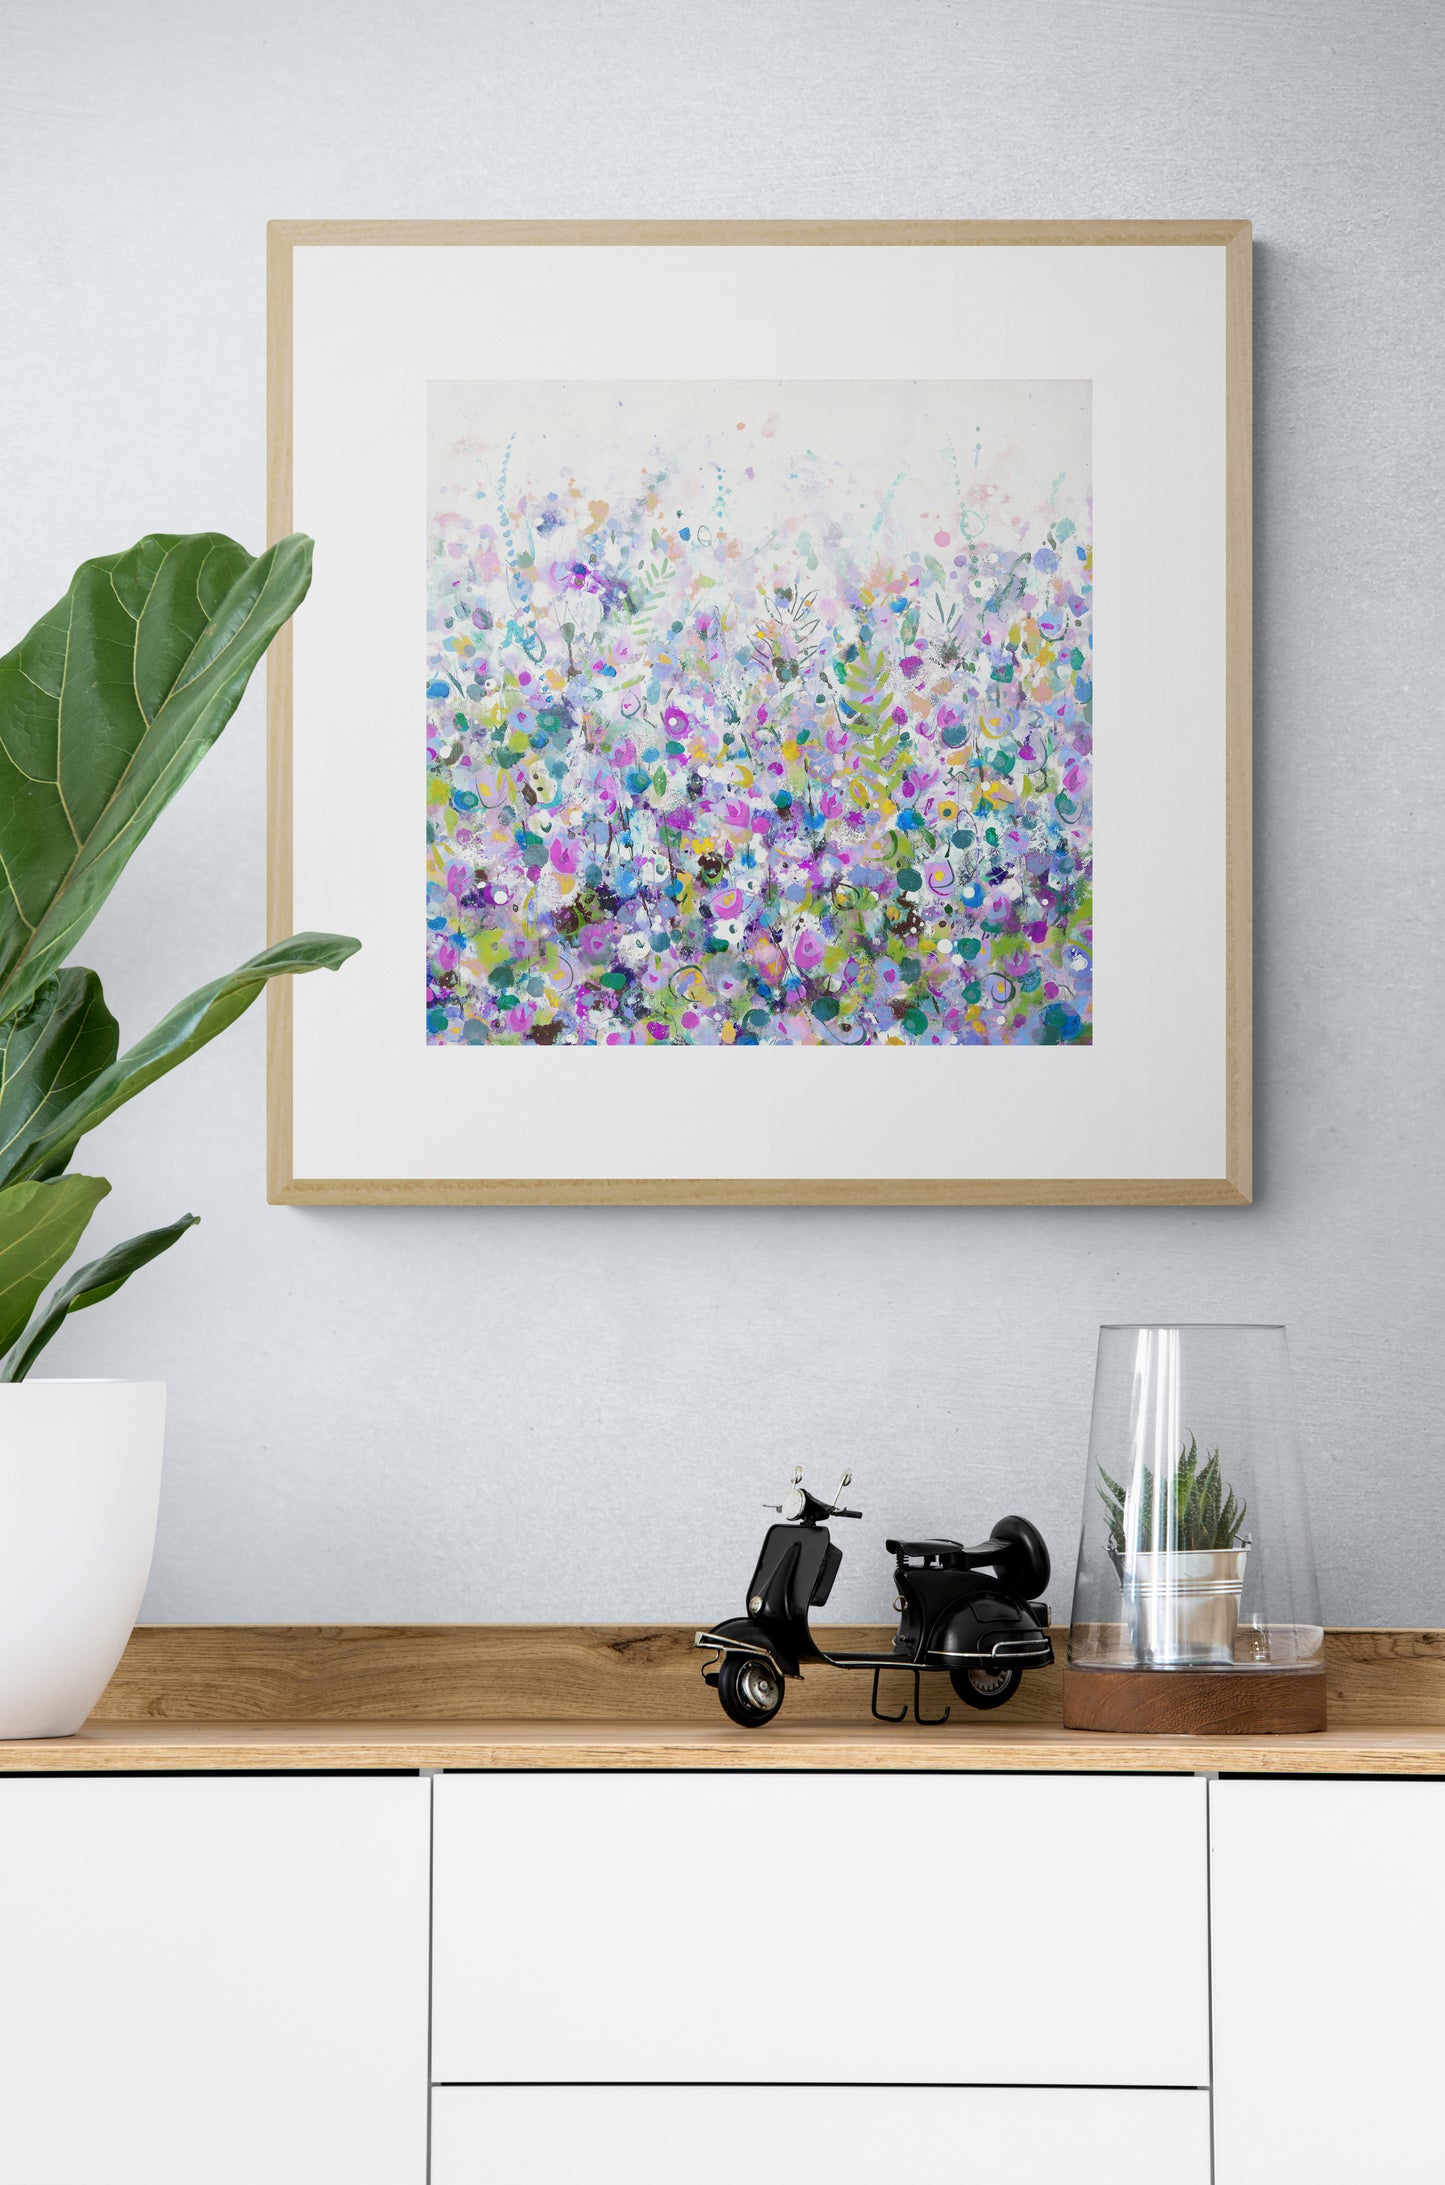 Purple Floral Meadow Wall Art Print on Stretched Canvas or Fine Art Paper